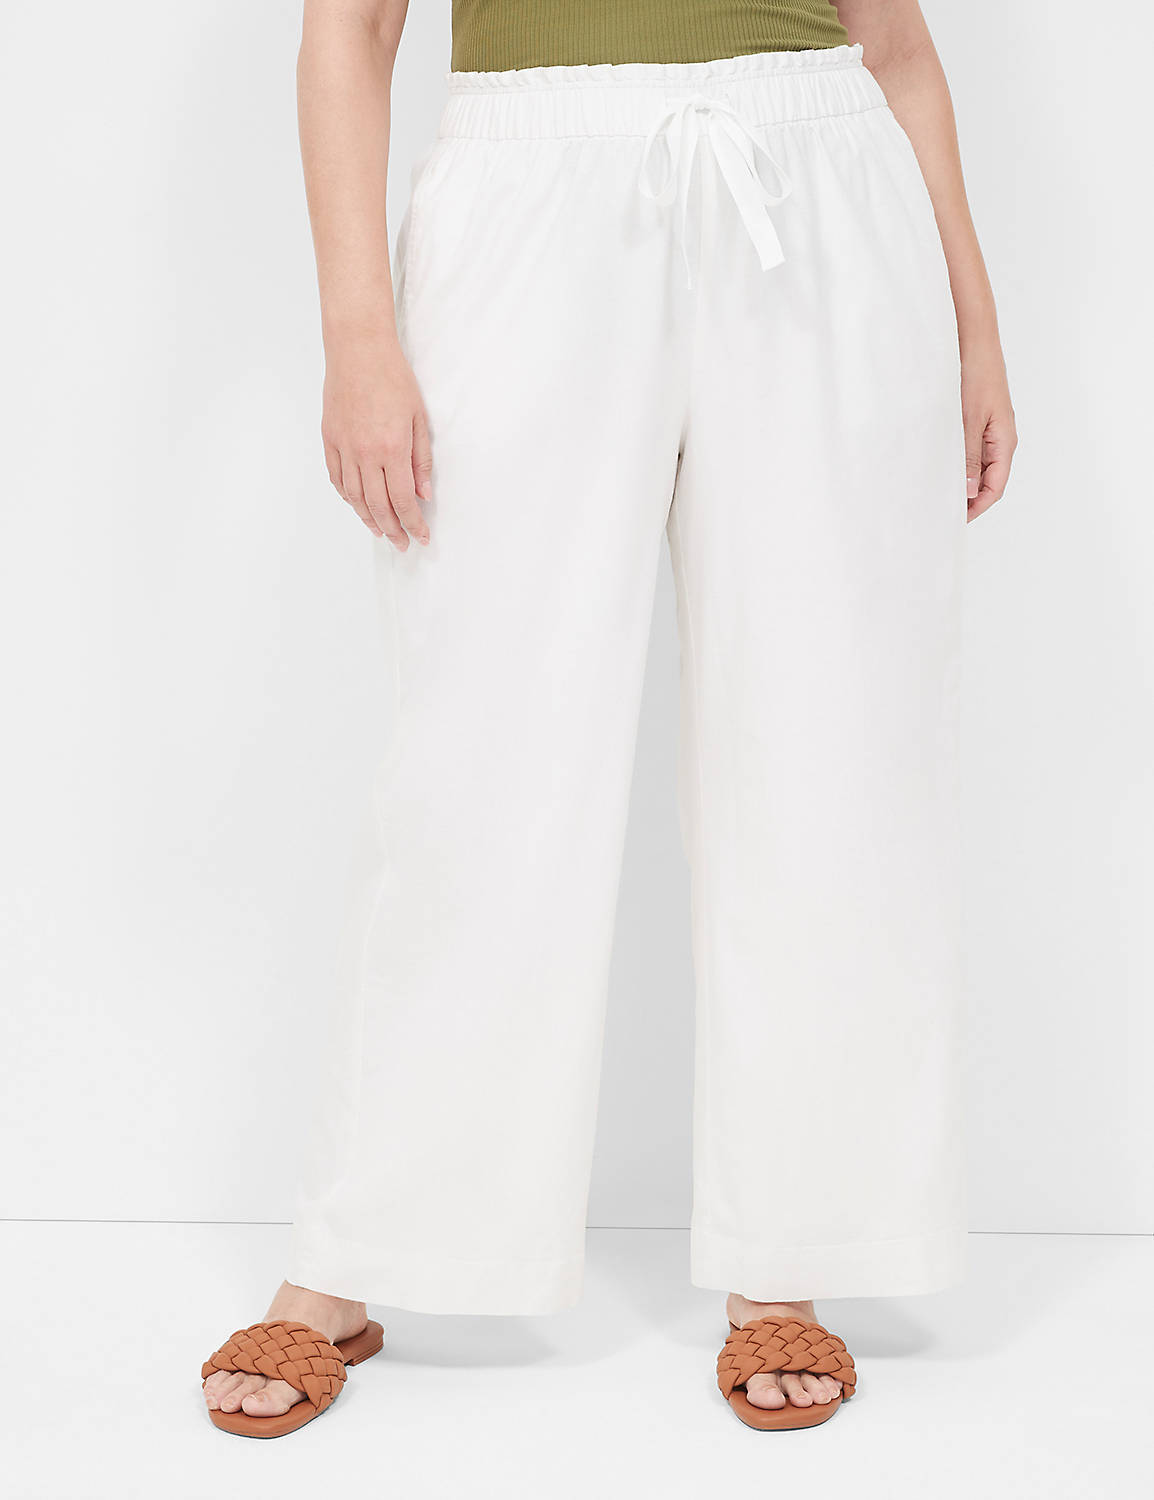 The Softest Wideleg - Linen 1141254 Product Image 1